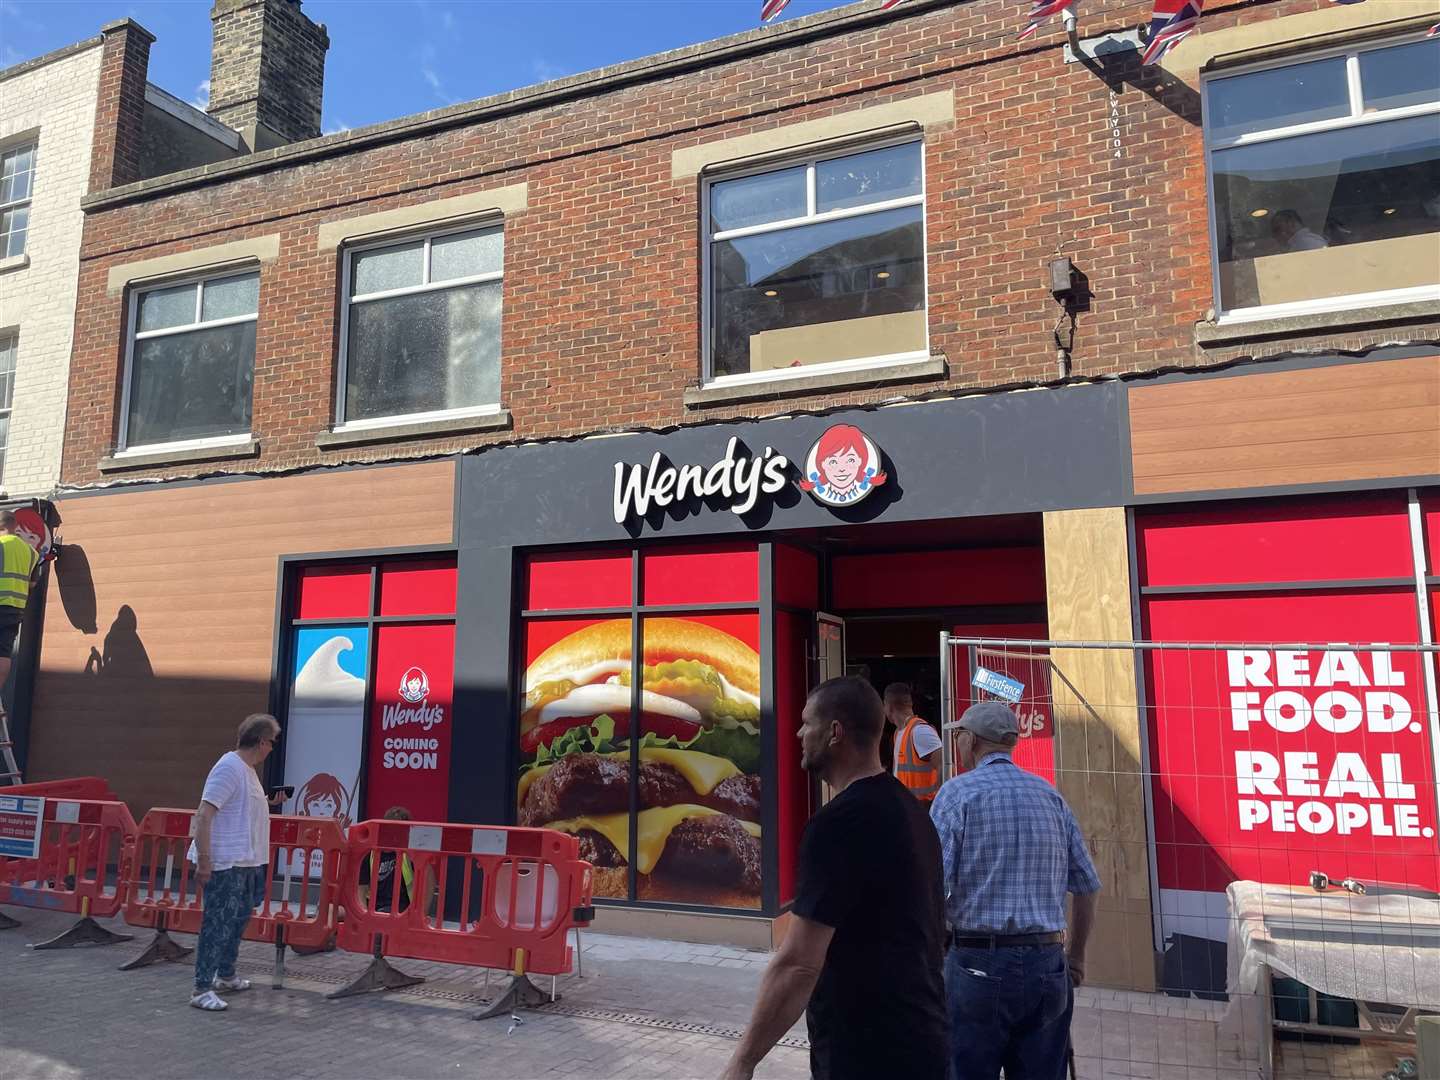 Wendy's in Week Street, Maidstone, has removed scaffolding from its site and will be opening soon